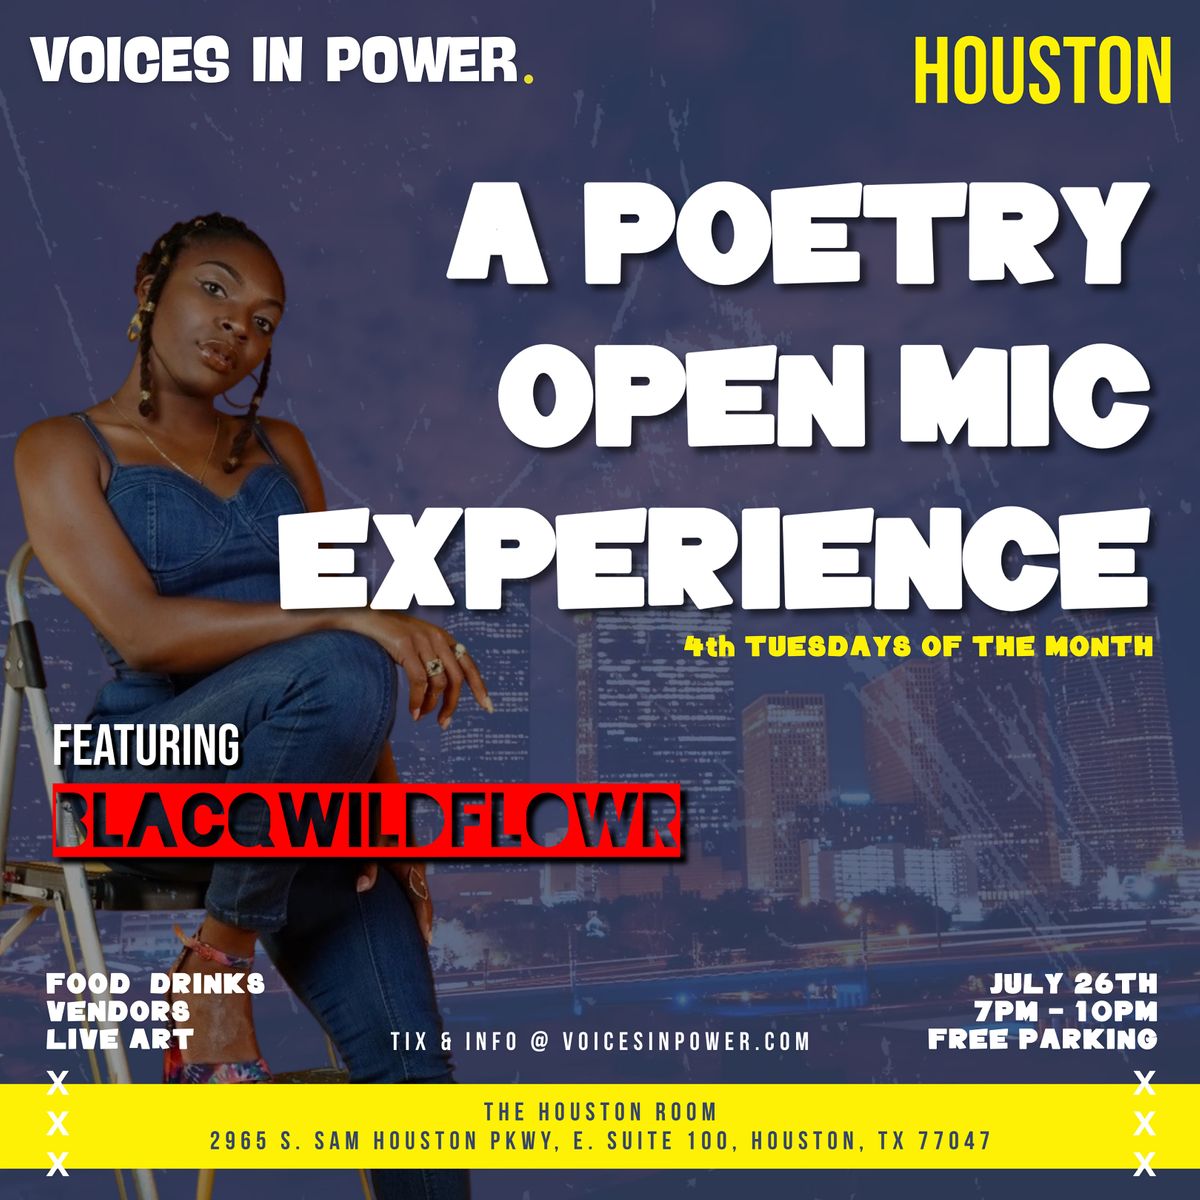 Voices In Power: A Poetry Open Mic Experience ft. Blacqwildflowr | HOUSTON